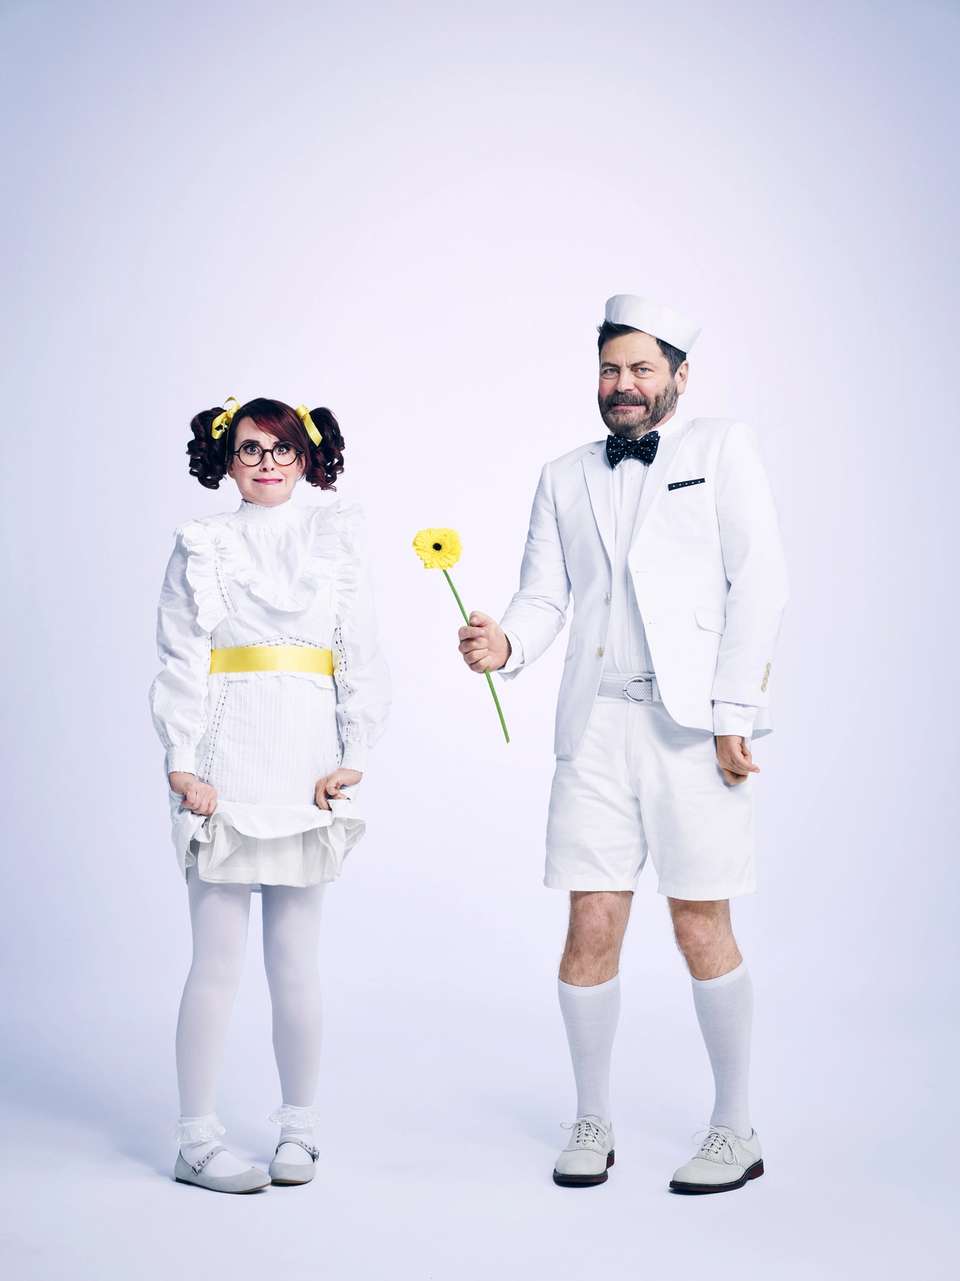 Megan & Nick dresses up as young children in all white clothing. Both looking awkward. Nick holding a yellow flower.